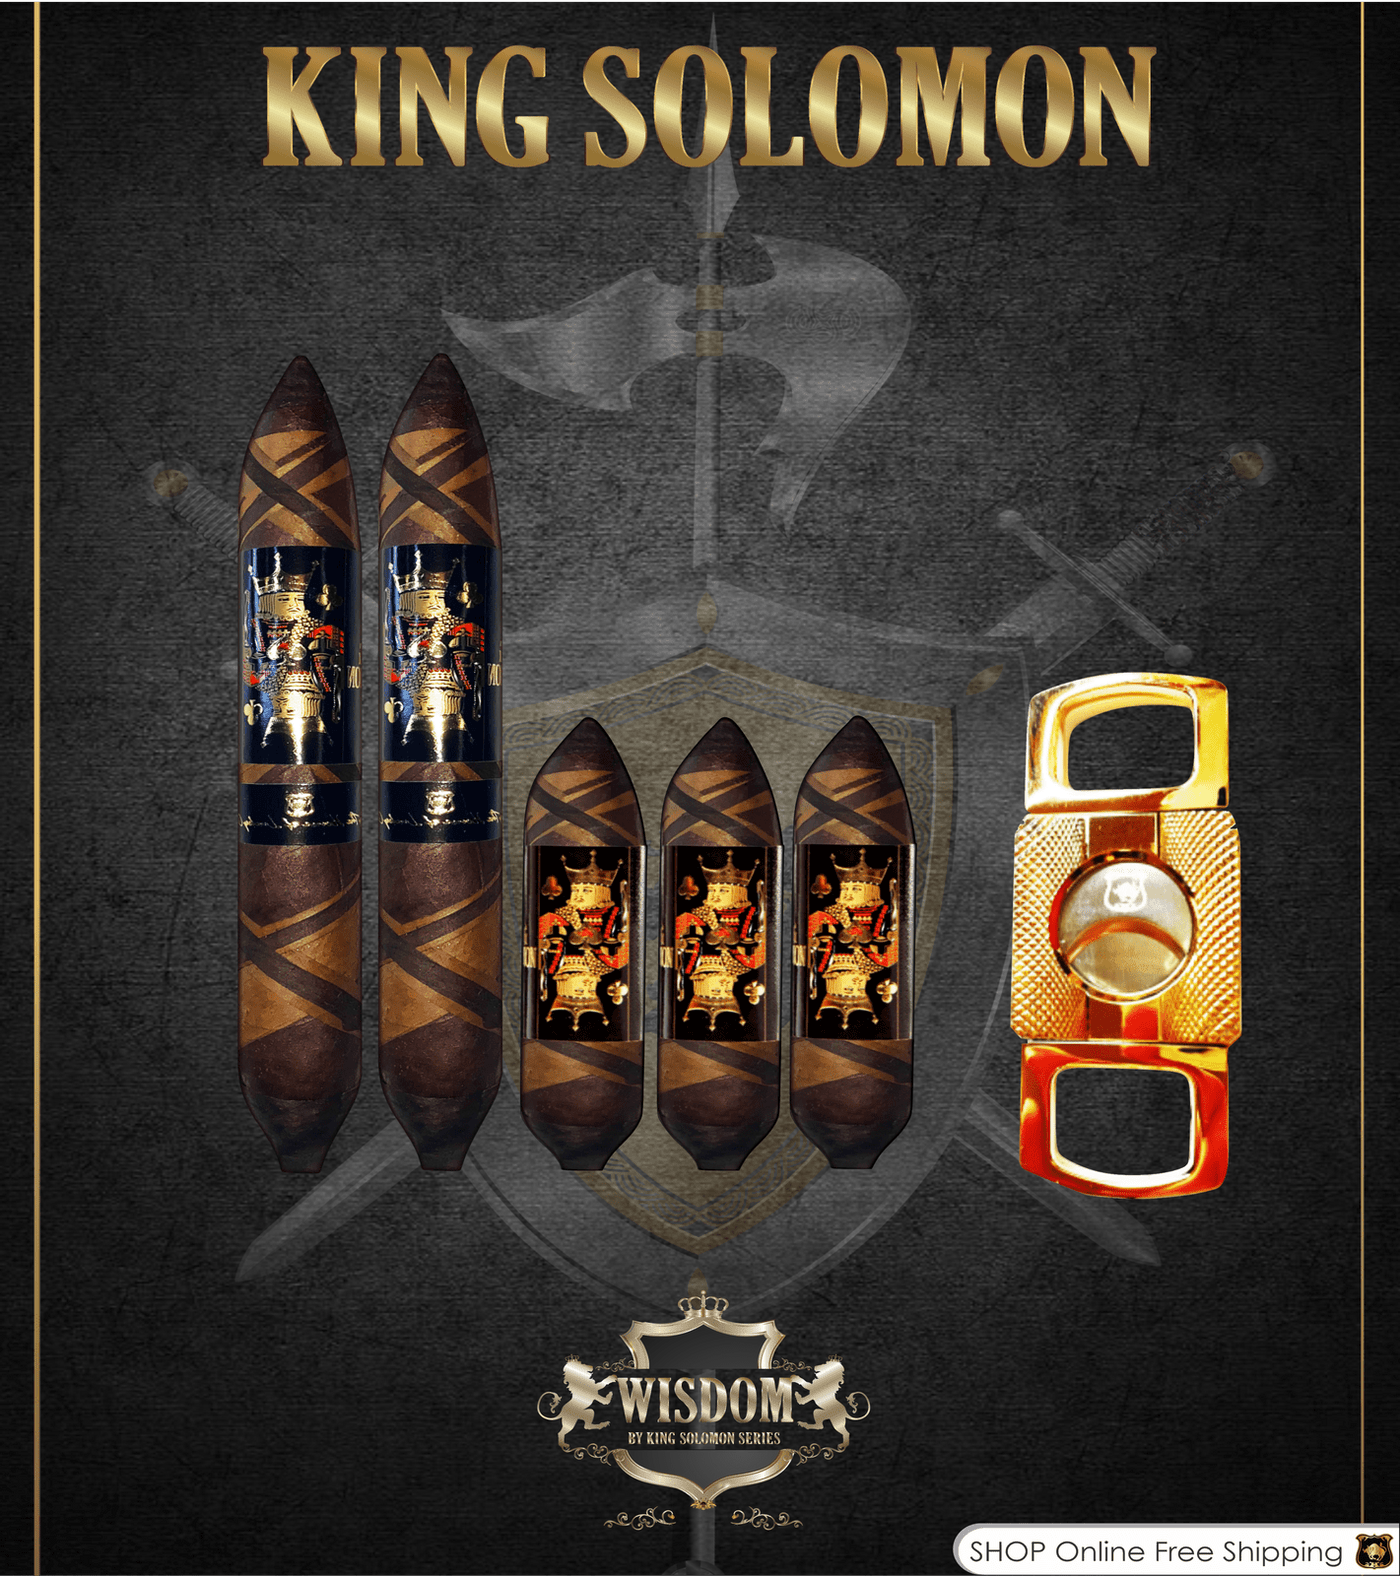 Wisdom 4x60 Cigar From The King Solomon Series: Set of 3 and 2 King Solomon 7x58 Cigar with Cutter